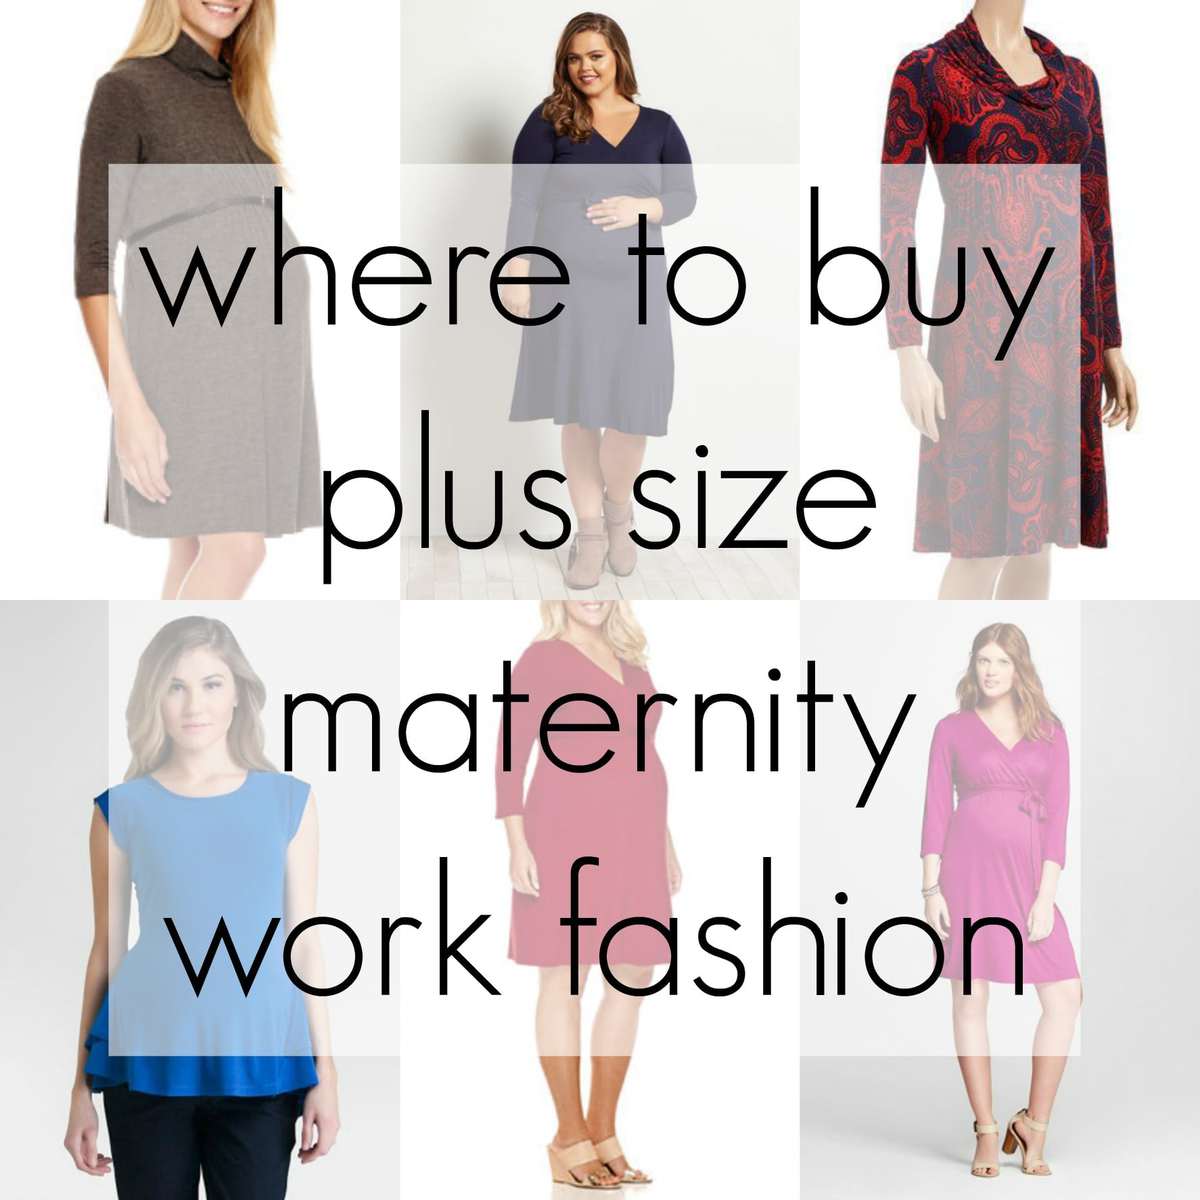 How to Market a Maternity Wear Business